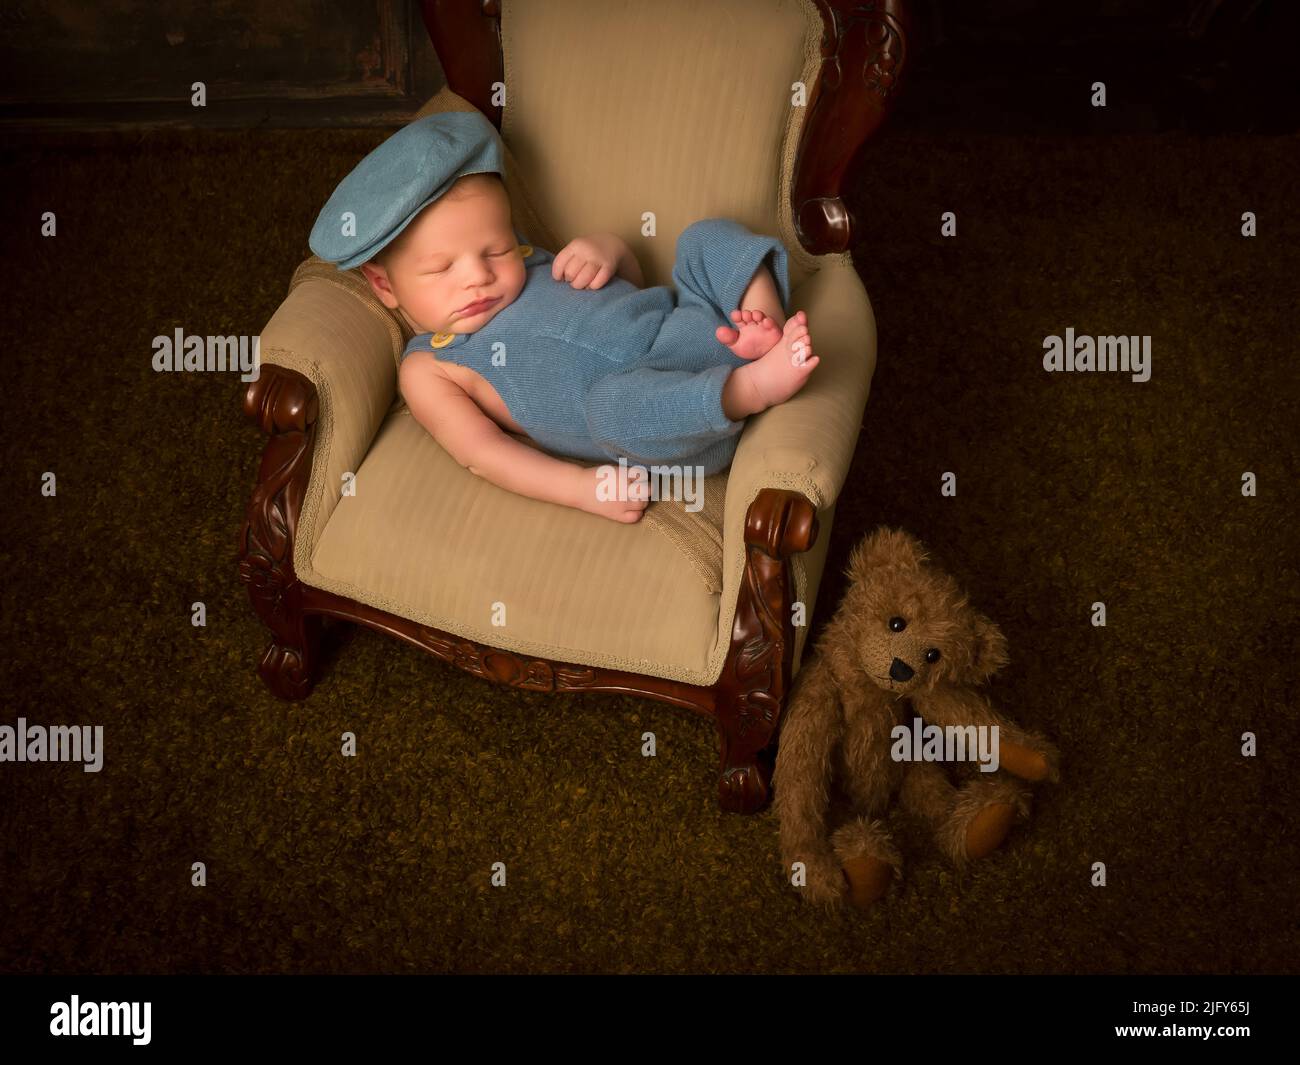 Newborn baby of 7 days old sleeping on an antique French armchair Stock Photo